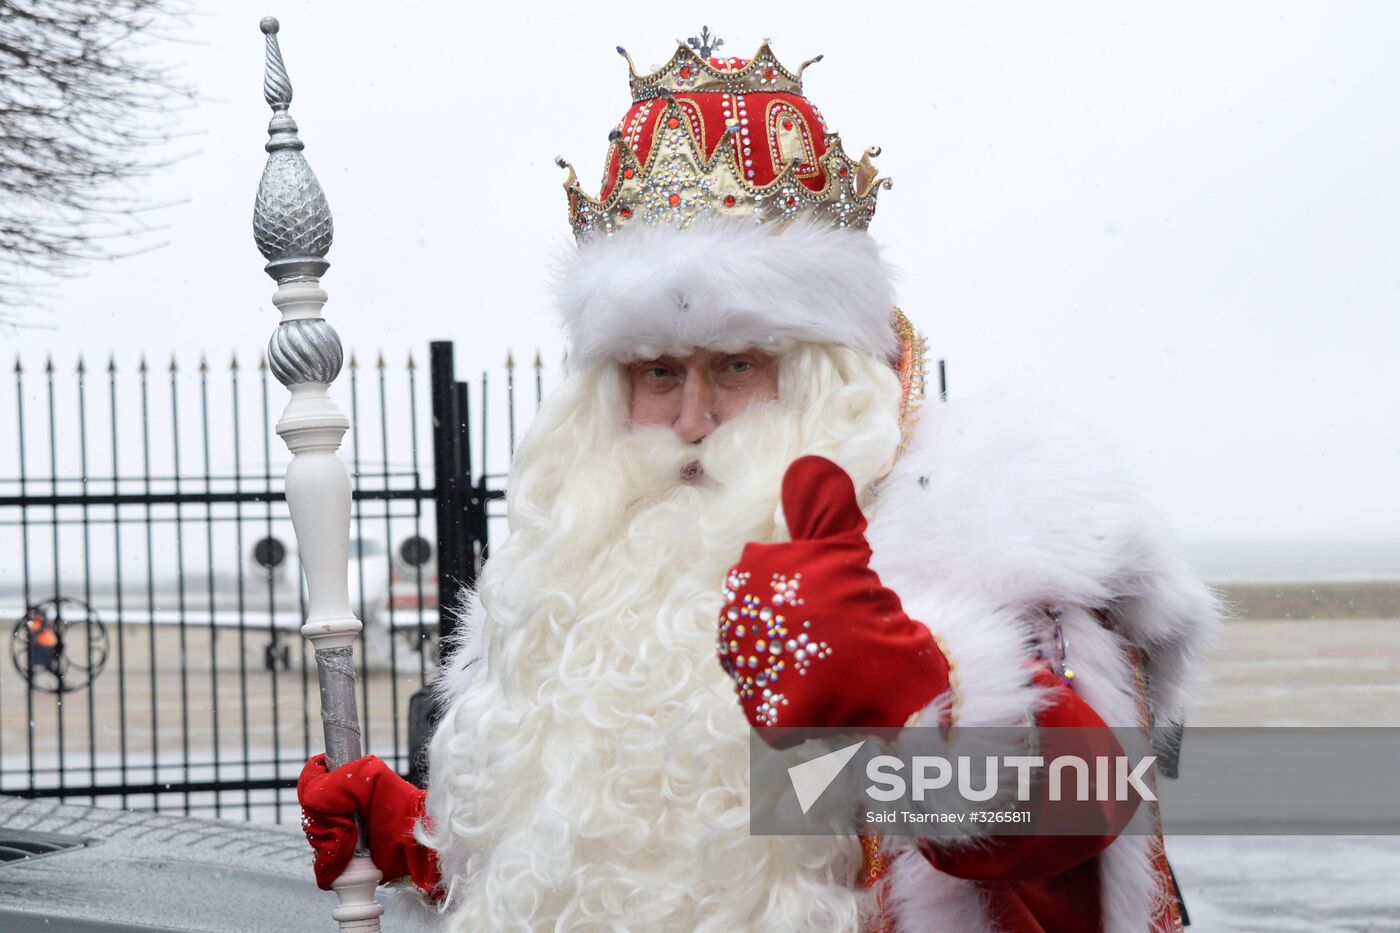 Russia's chief Father Frost from Veliky Ustyug arrives in Grozny